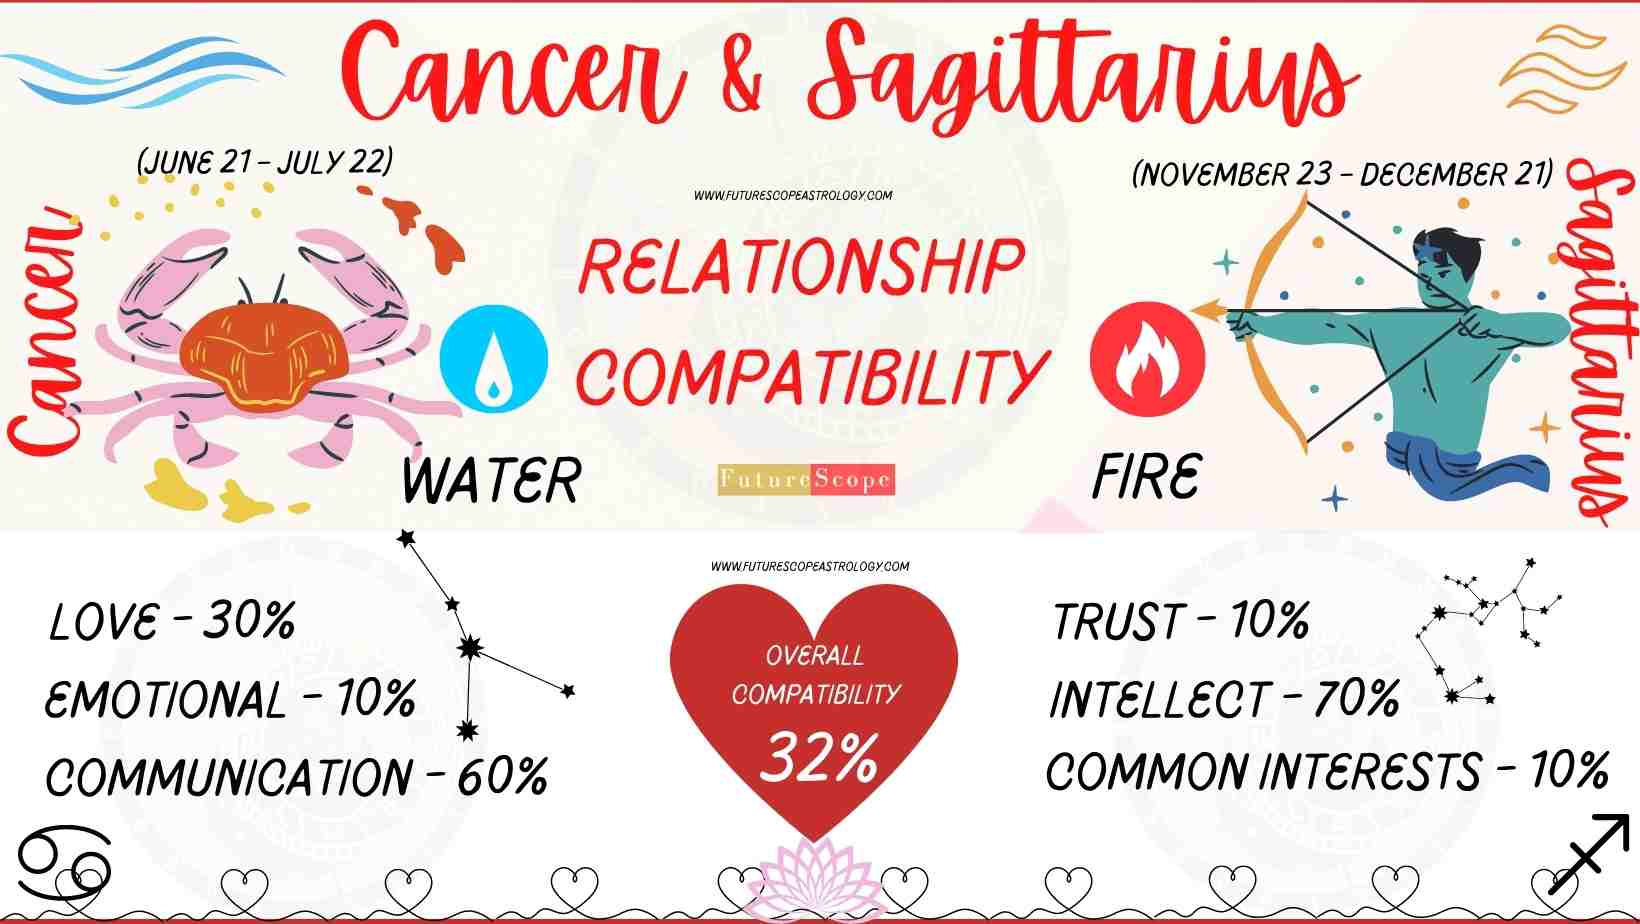 Cancer Man and Sagittarius Woman Compatibility (32, low) love